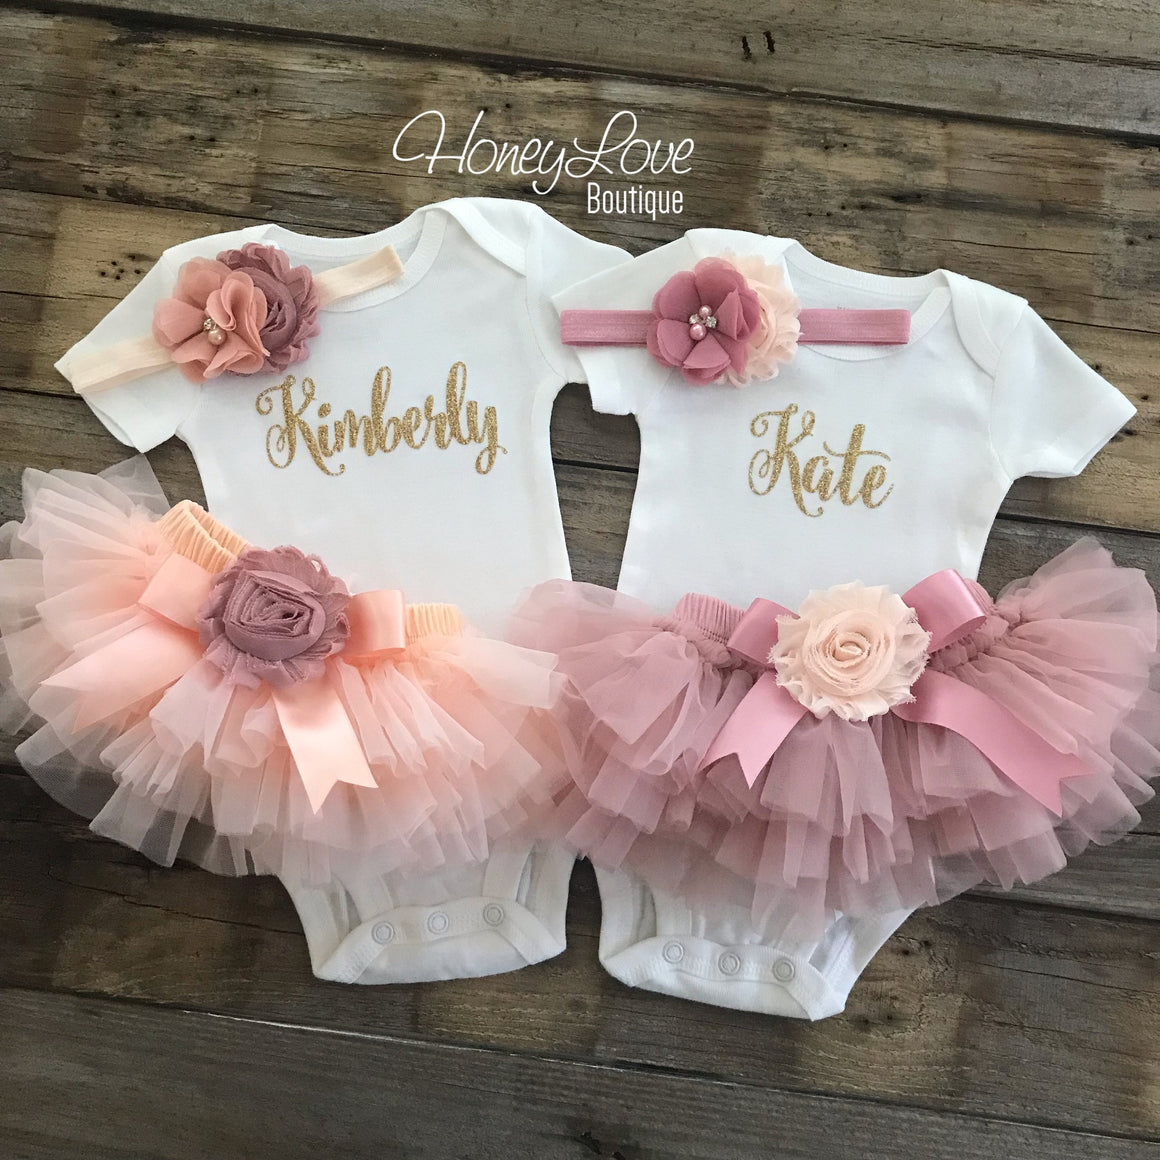 TWIN GIRLS! Peach and Vintage Pink Personalized Name Outfits - Gold, Silver or Rose Gold glitter - HoneyLoveBoutique